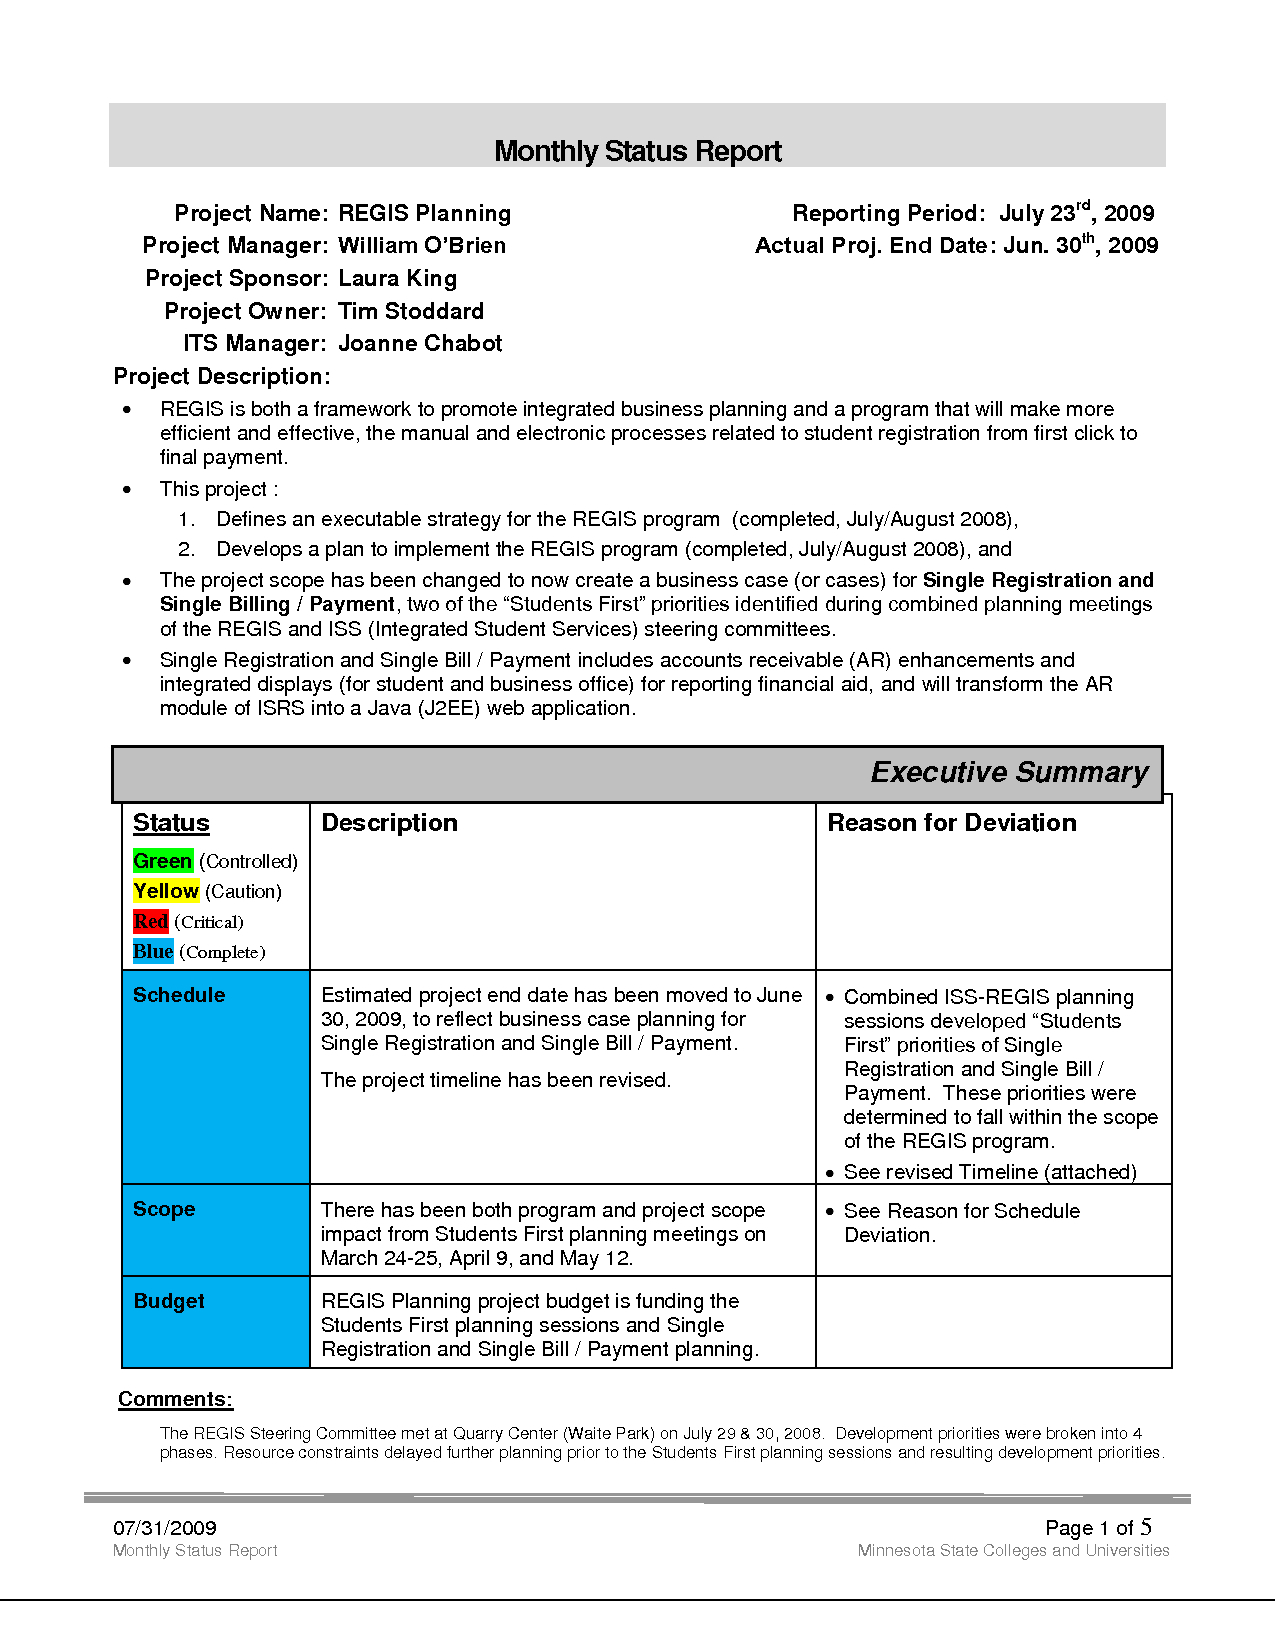 Research Project Report Template - Atlantaauctionco Intended For Research Project Report Template